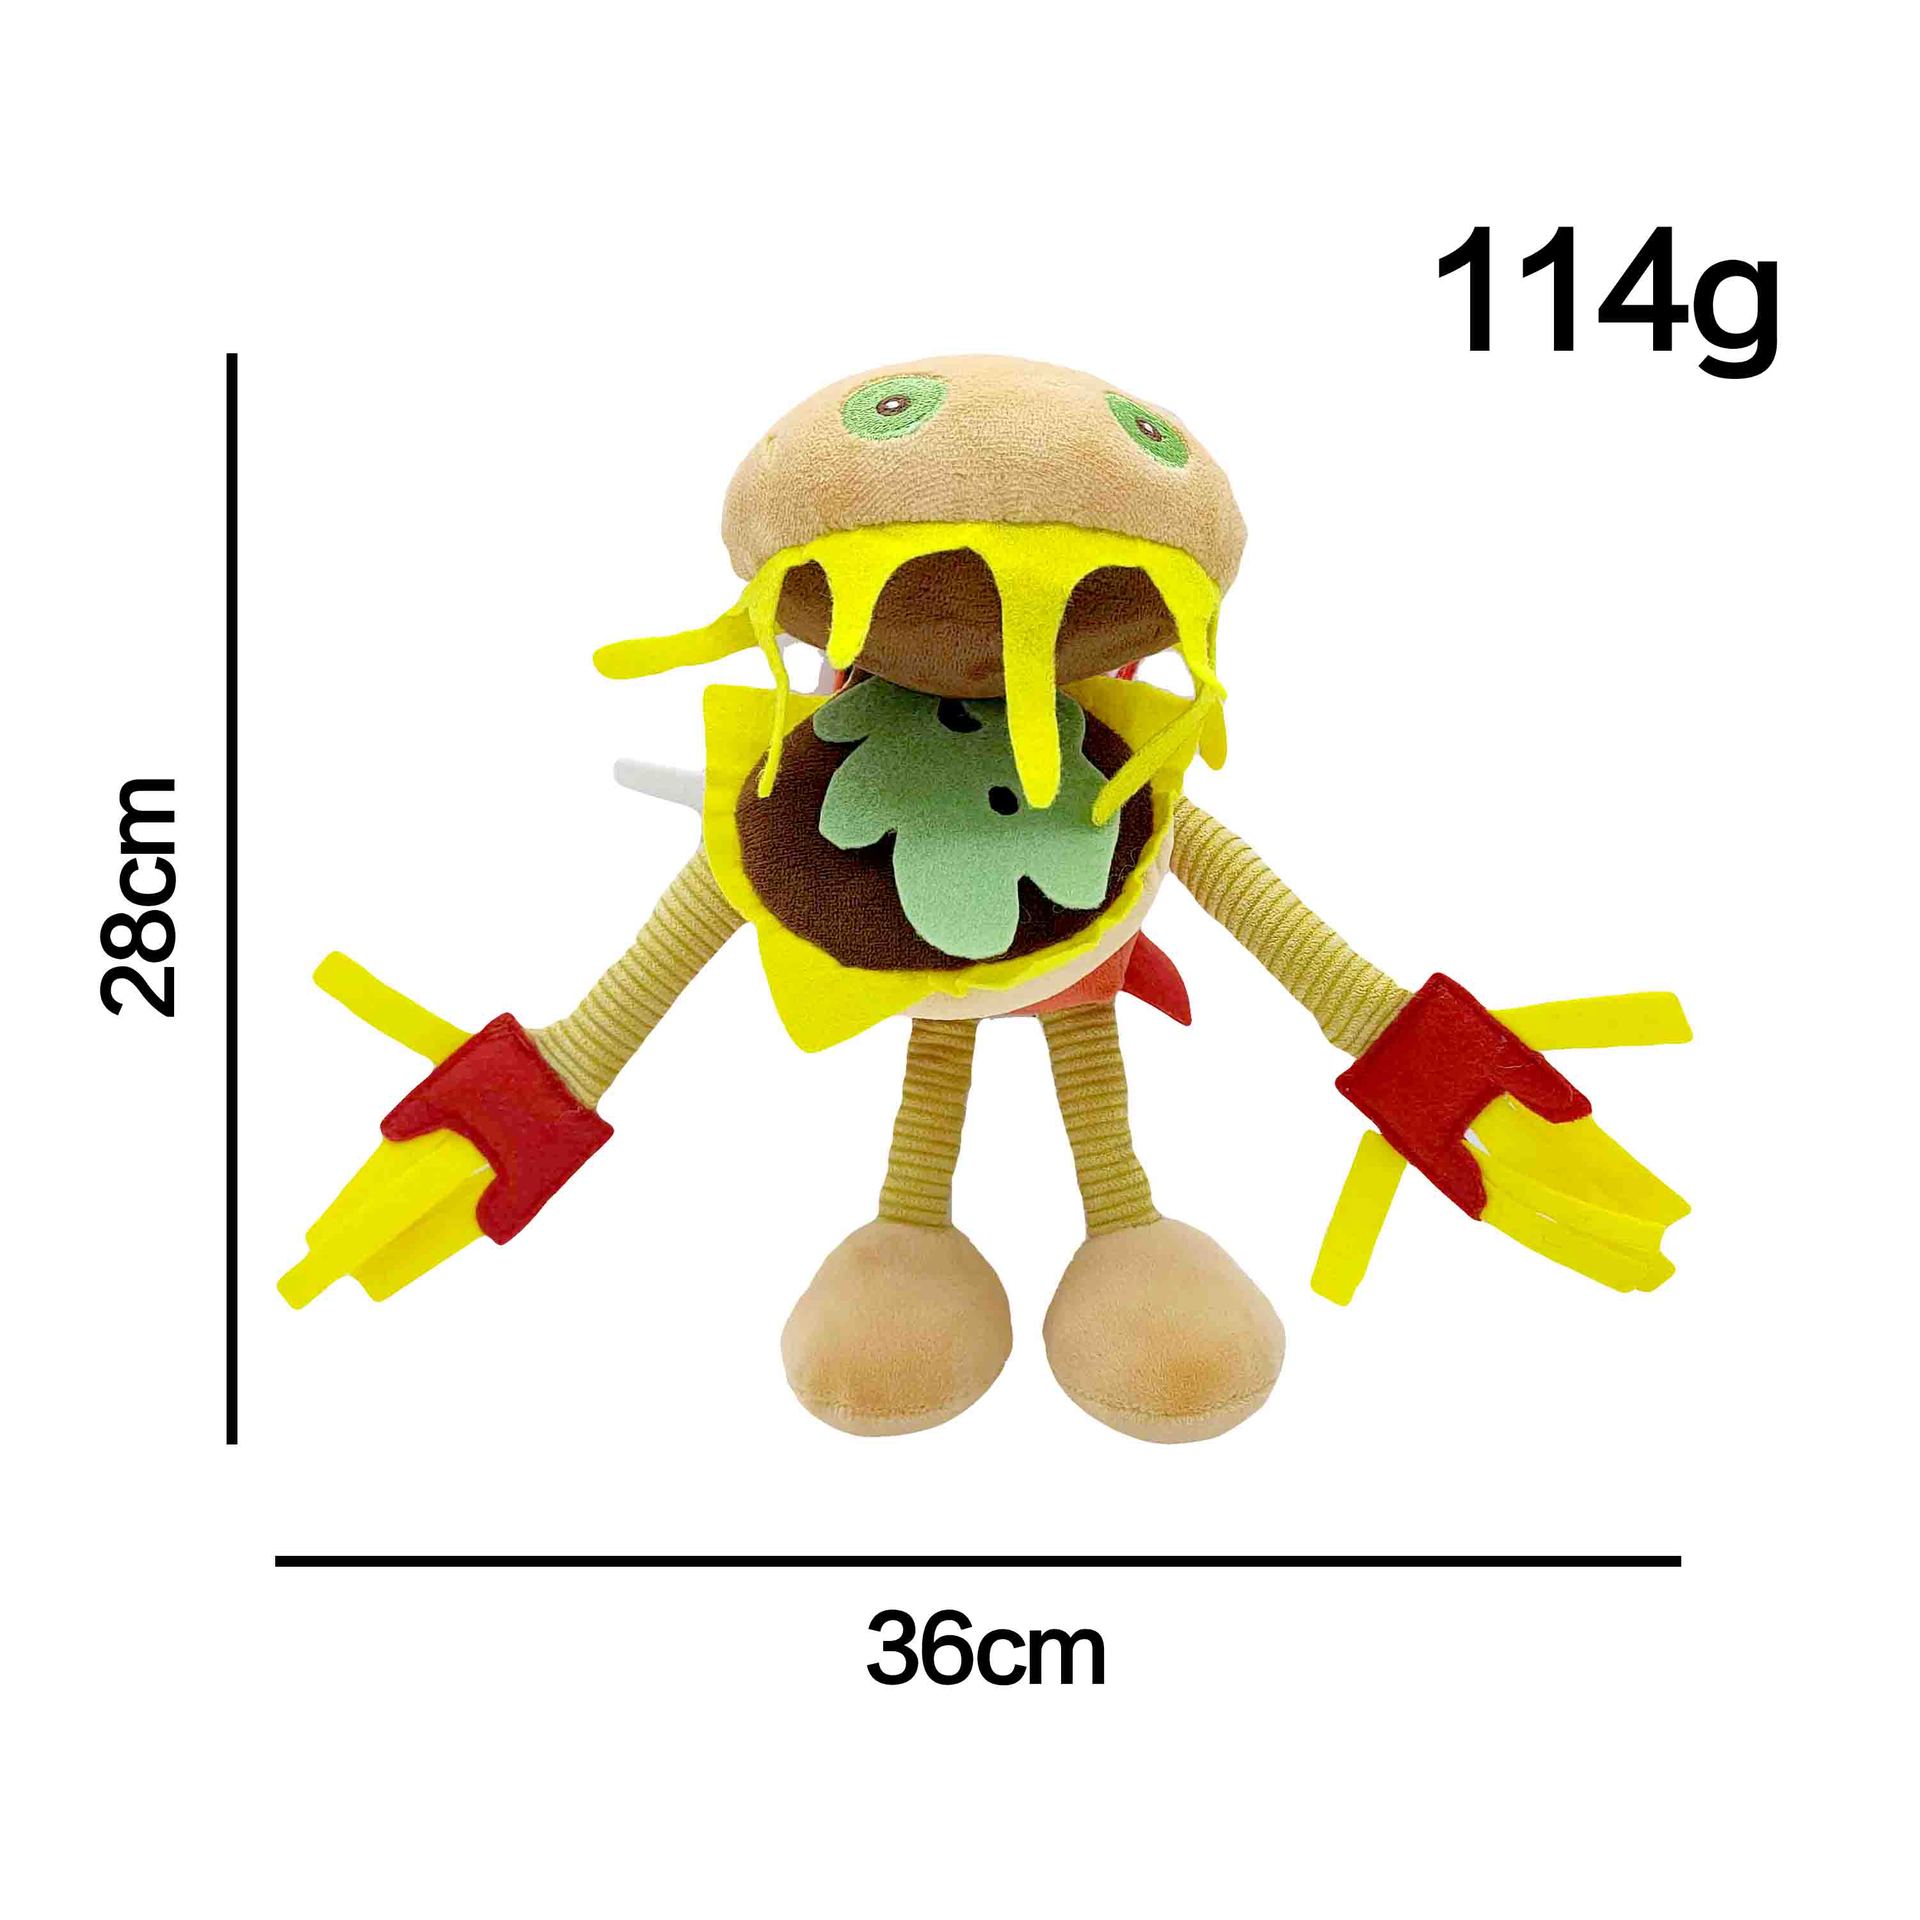 Boxy Boo Toy Hamburger Cartoon Game Peripheral Dolls Red Robot Filled Plush Dolls Holiday Gift Collection 5 - Boxy Boo Plush